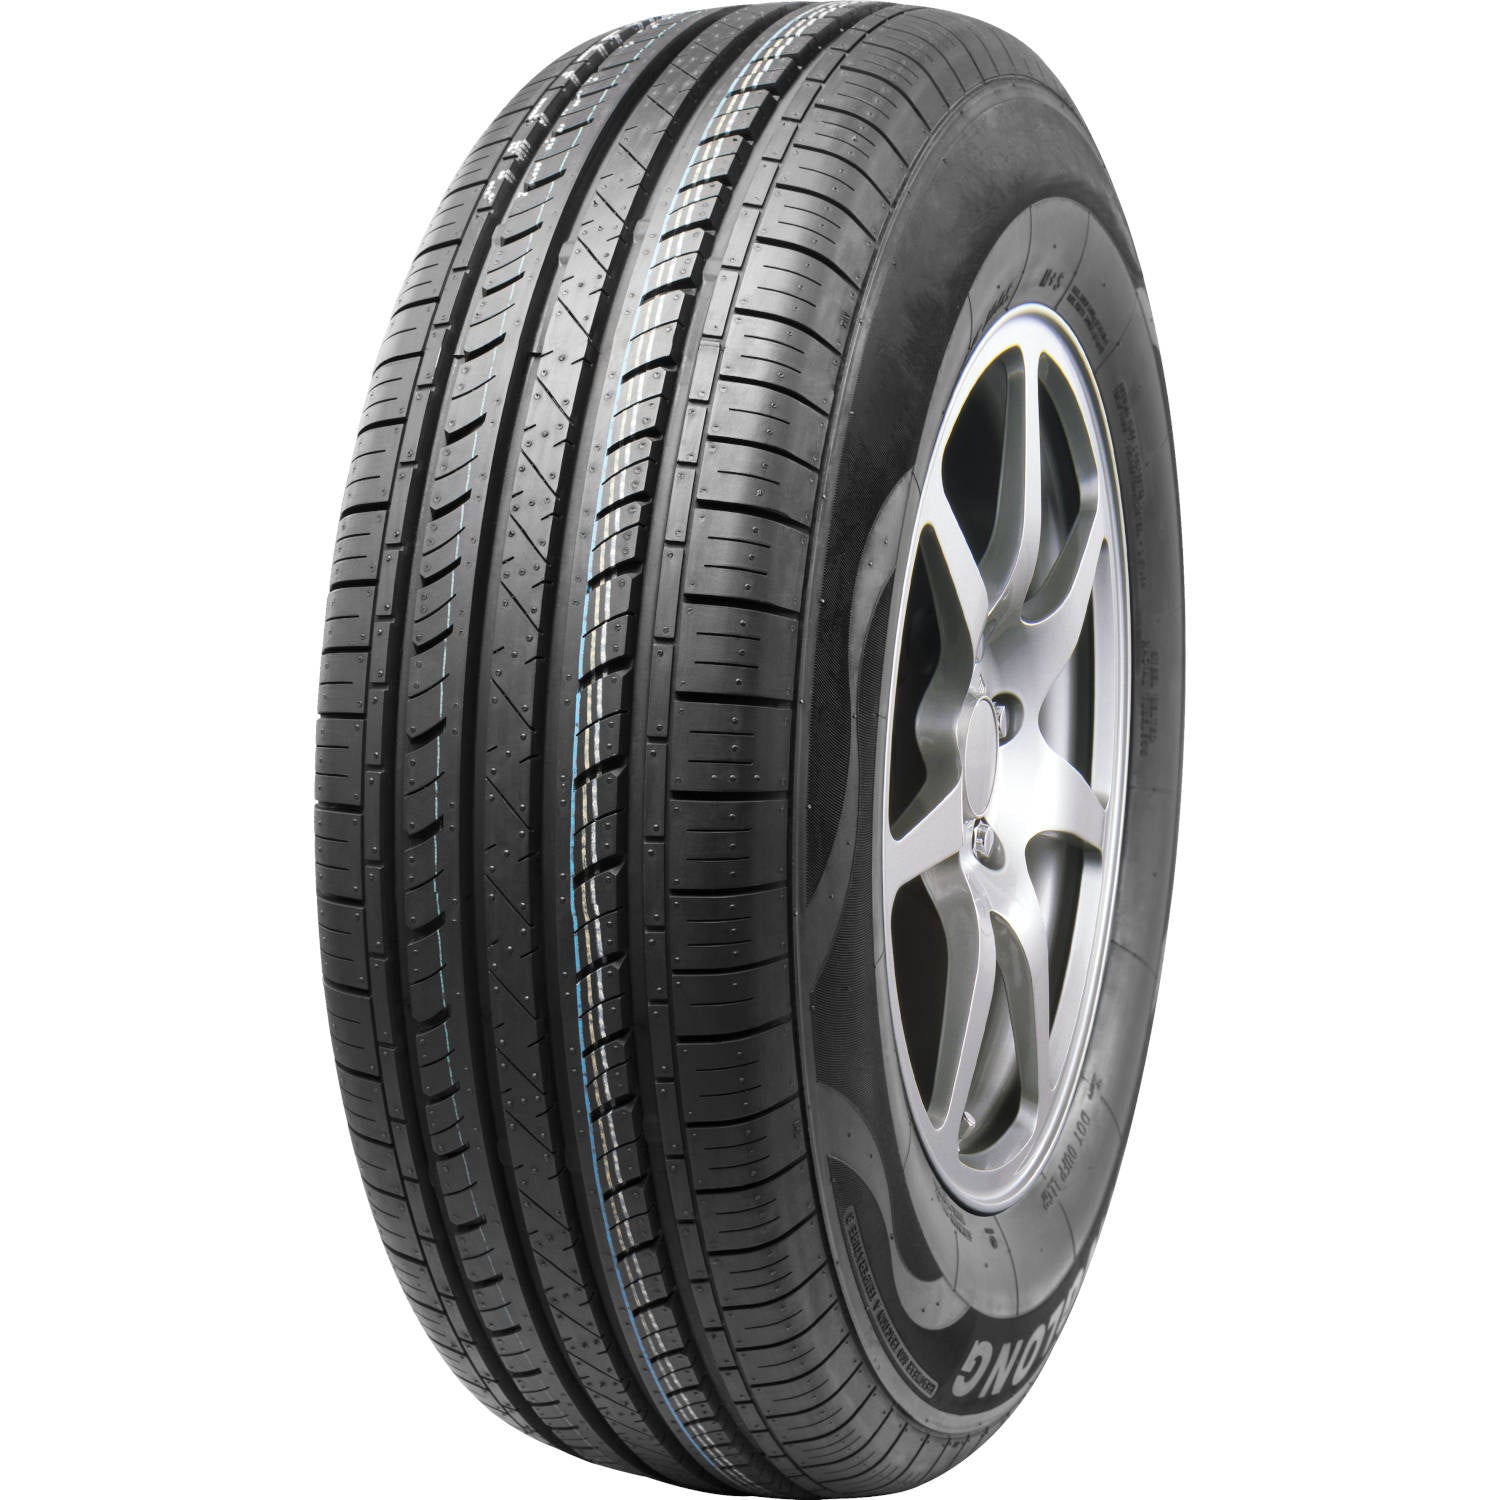 ROAD ONE CAVALRY A/S 205/65R15 (25.5X8.1R 15) Tires